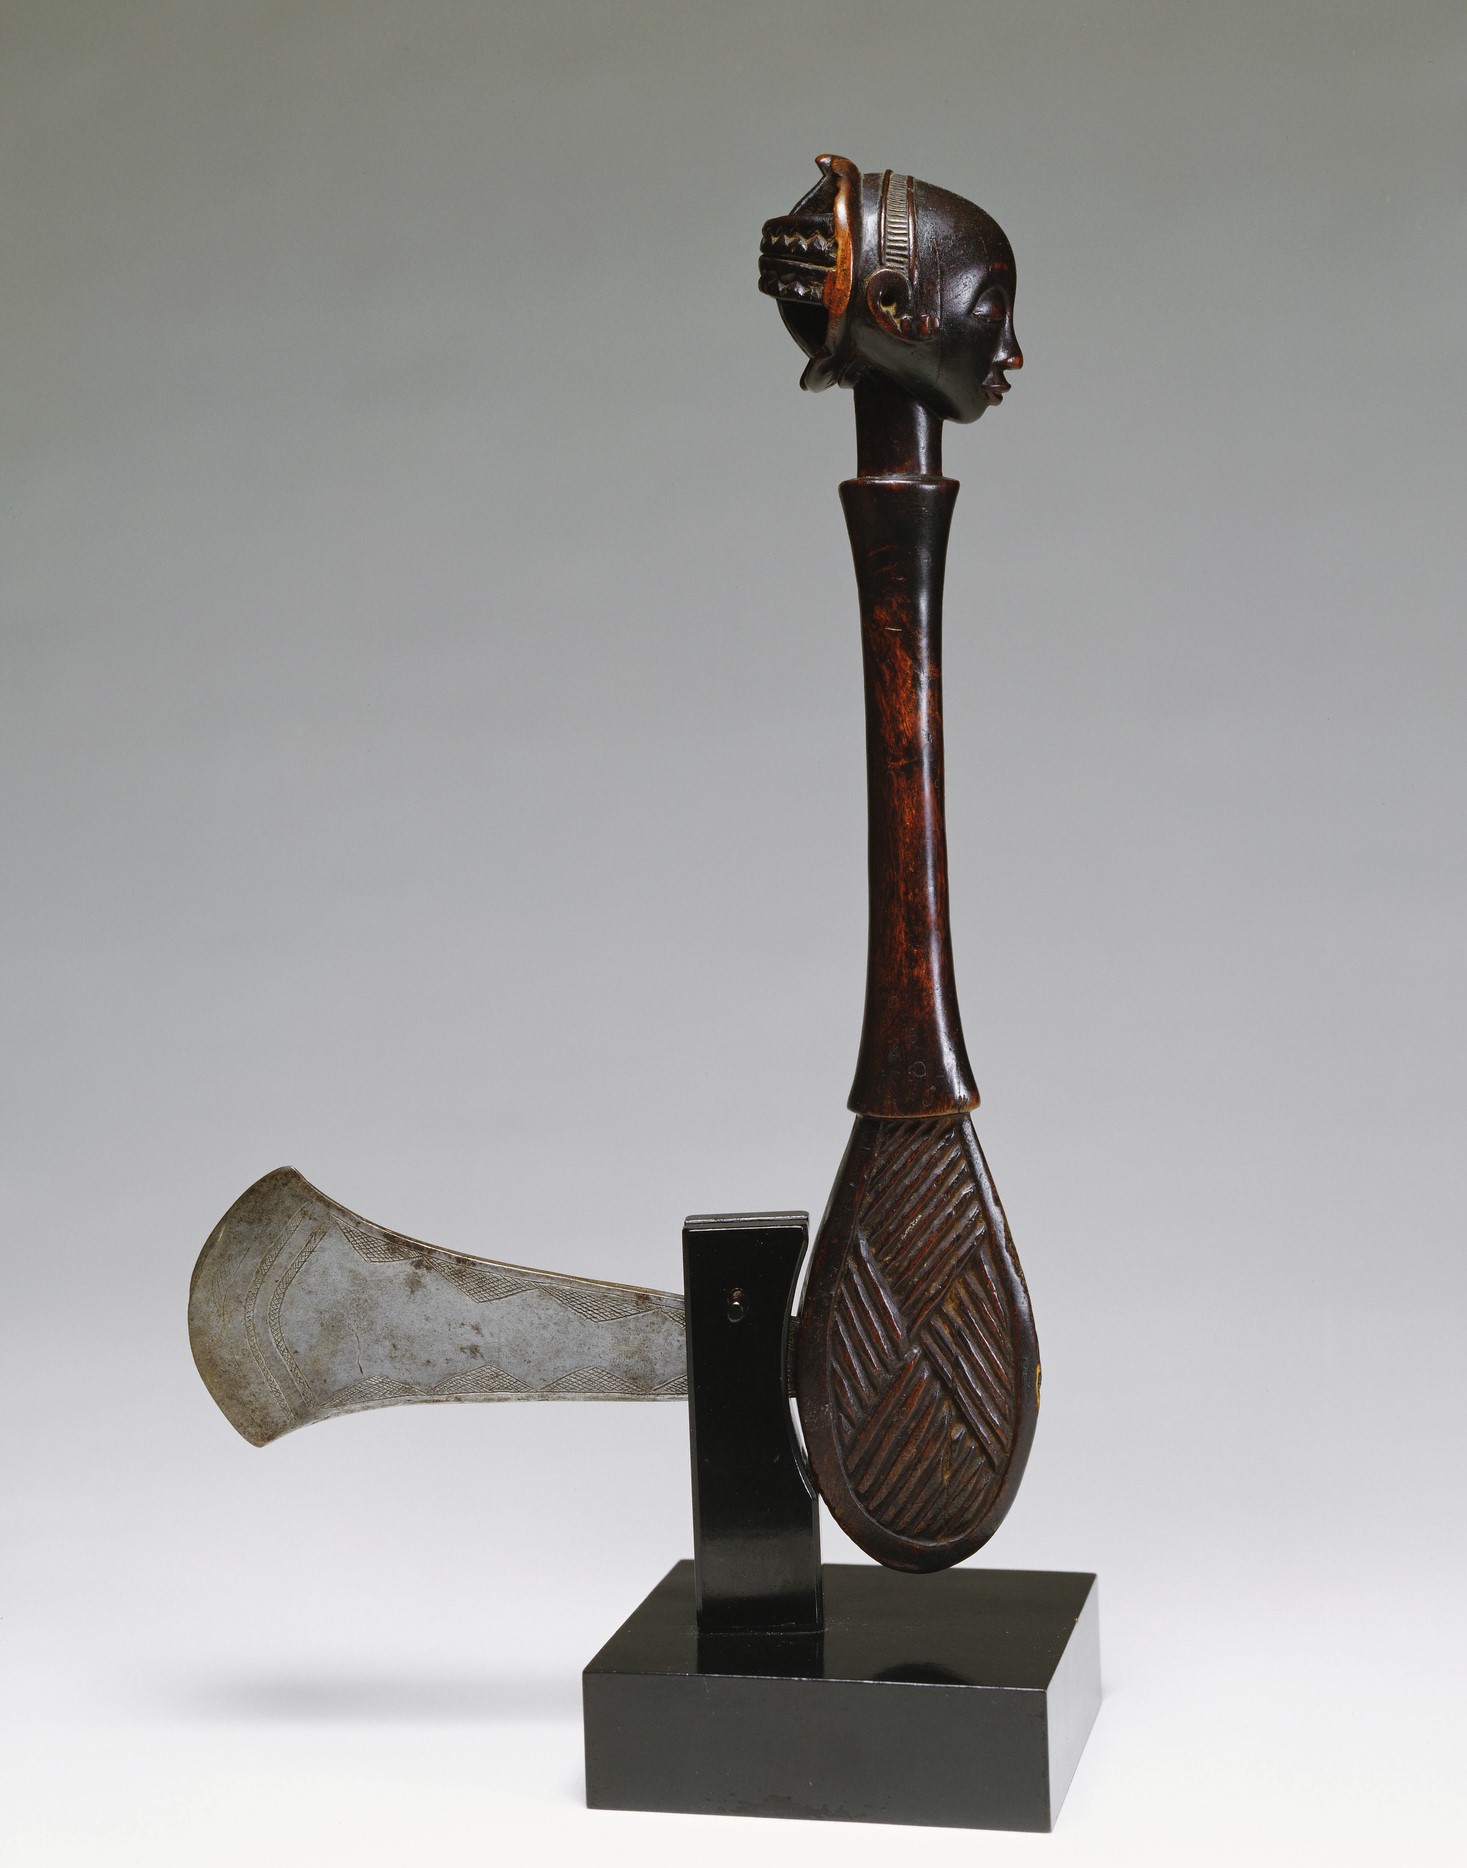 An axe with a wooden handle in the shape of a head and neck